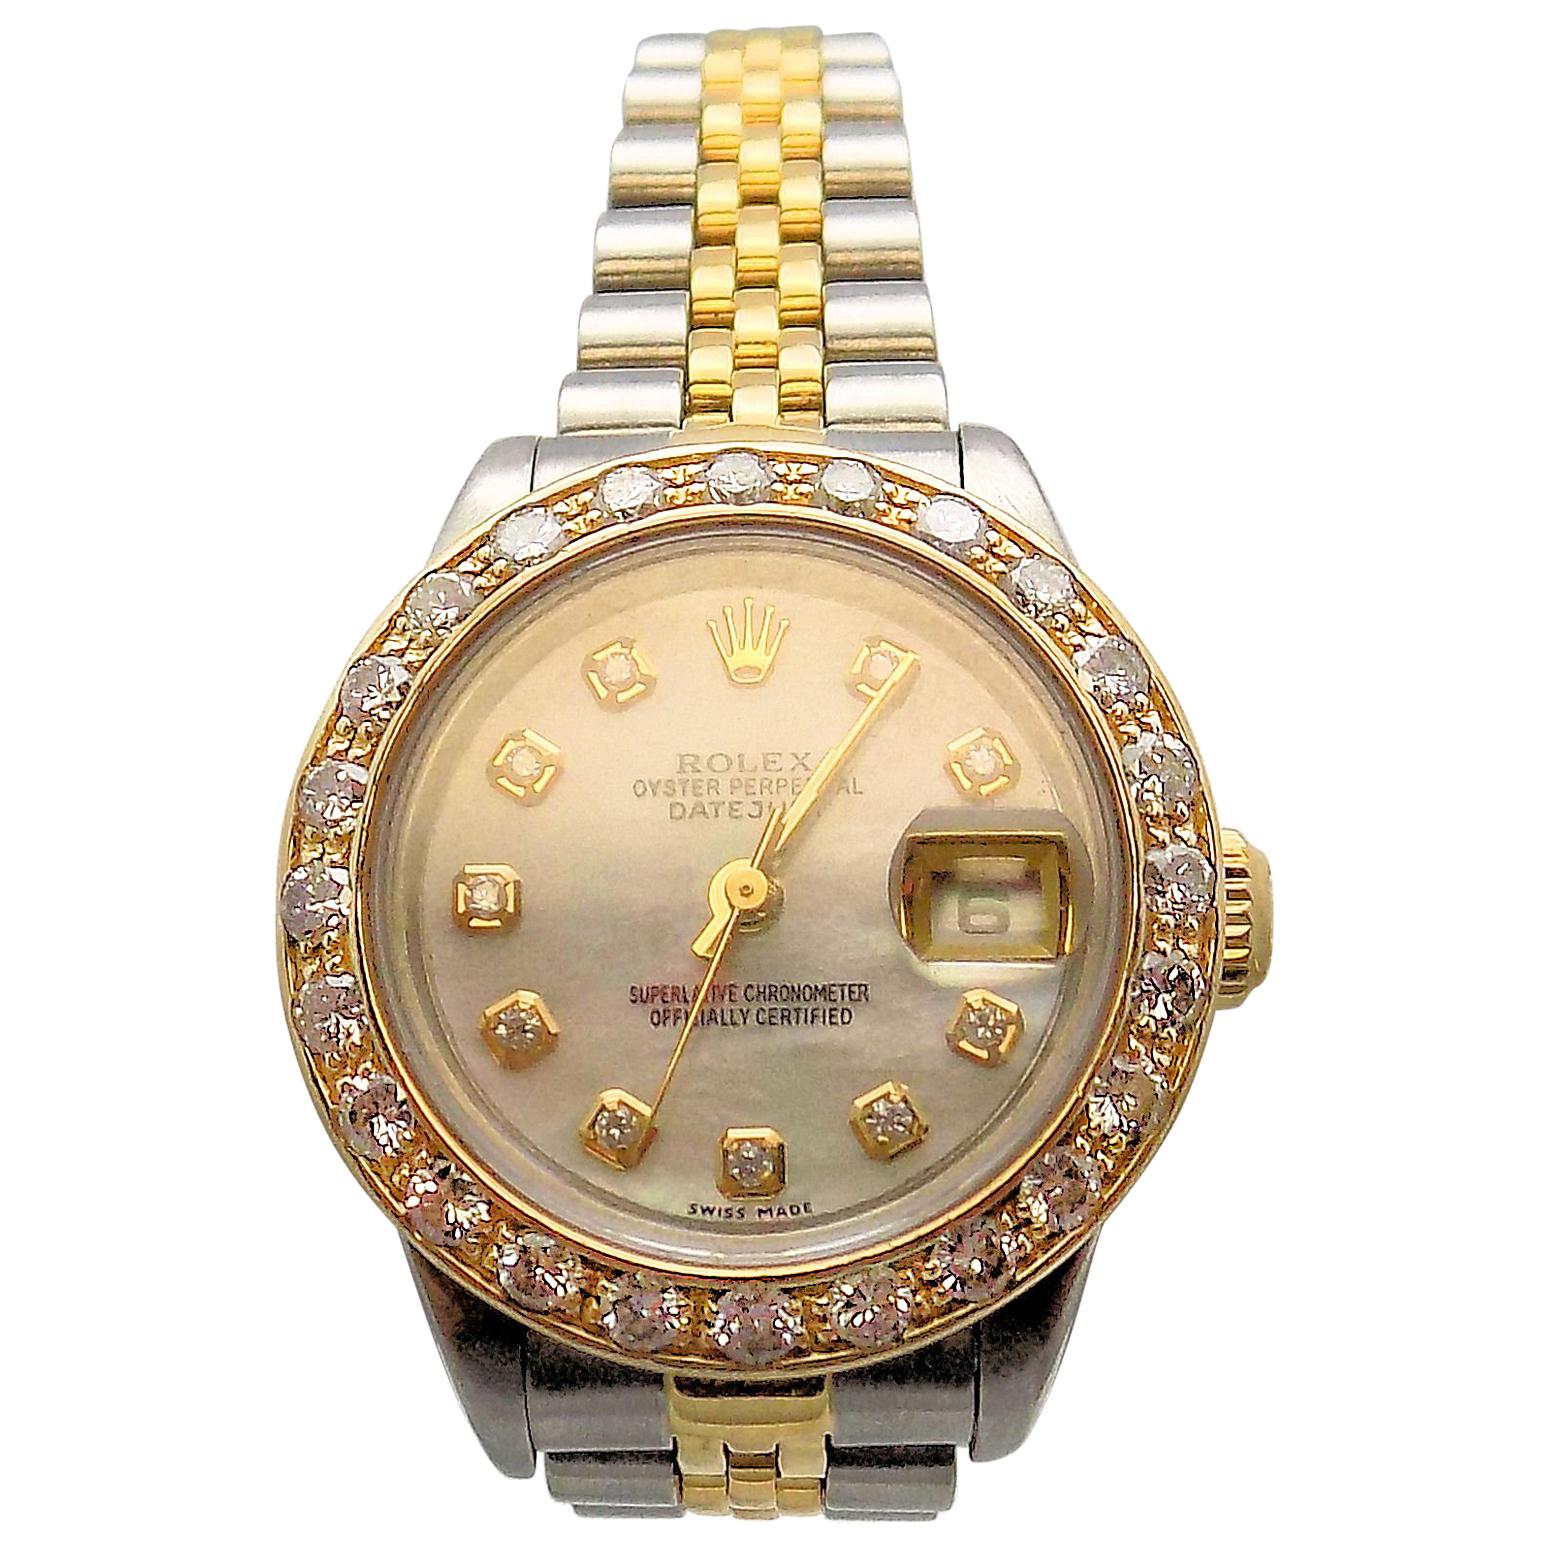 Lady's Diamond Rolex Wrist Watch with Mother-of-Pearl Dial For Sale